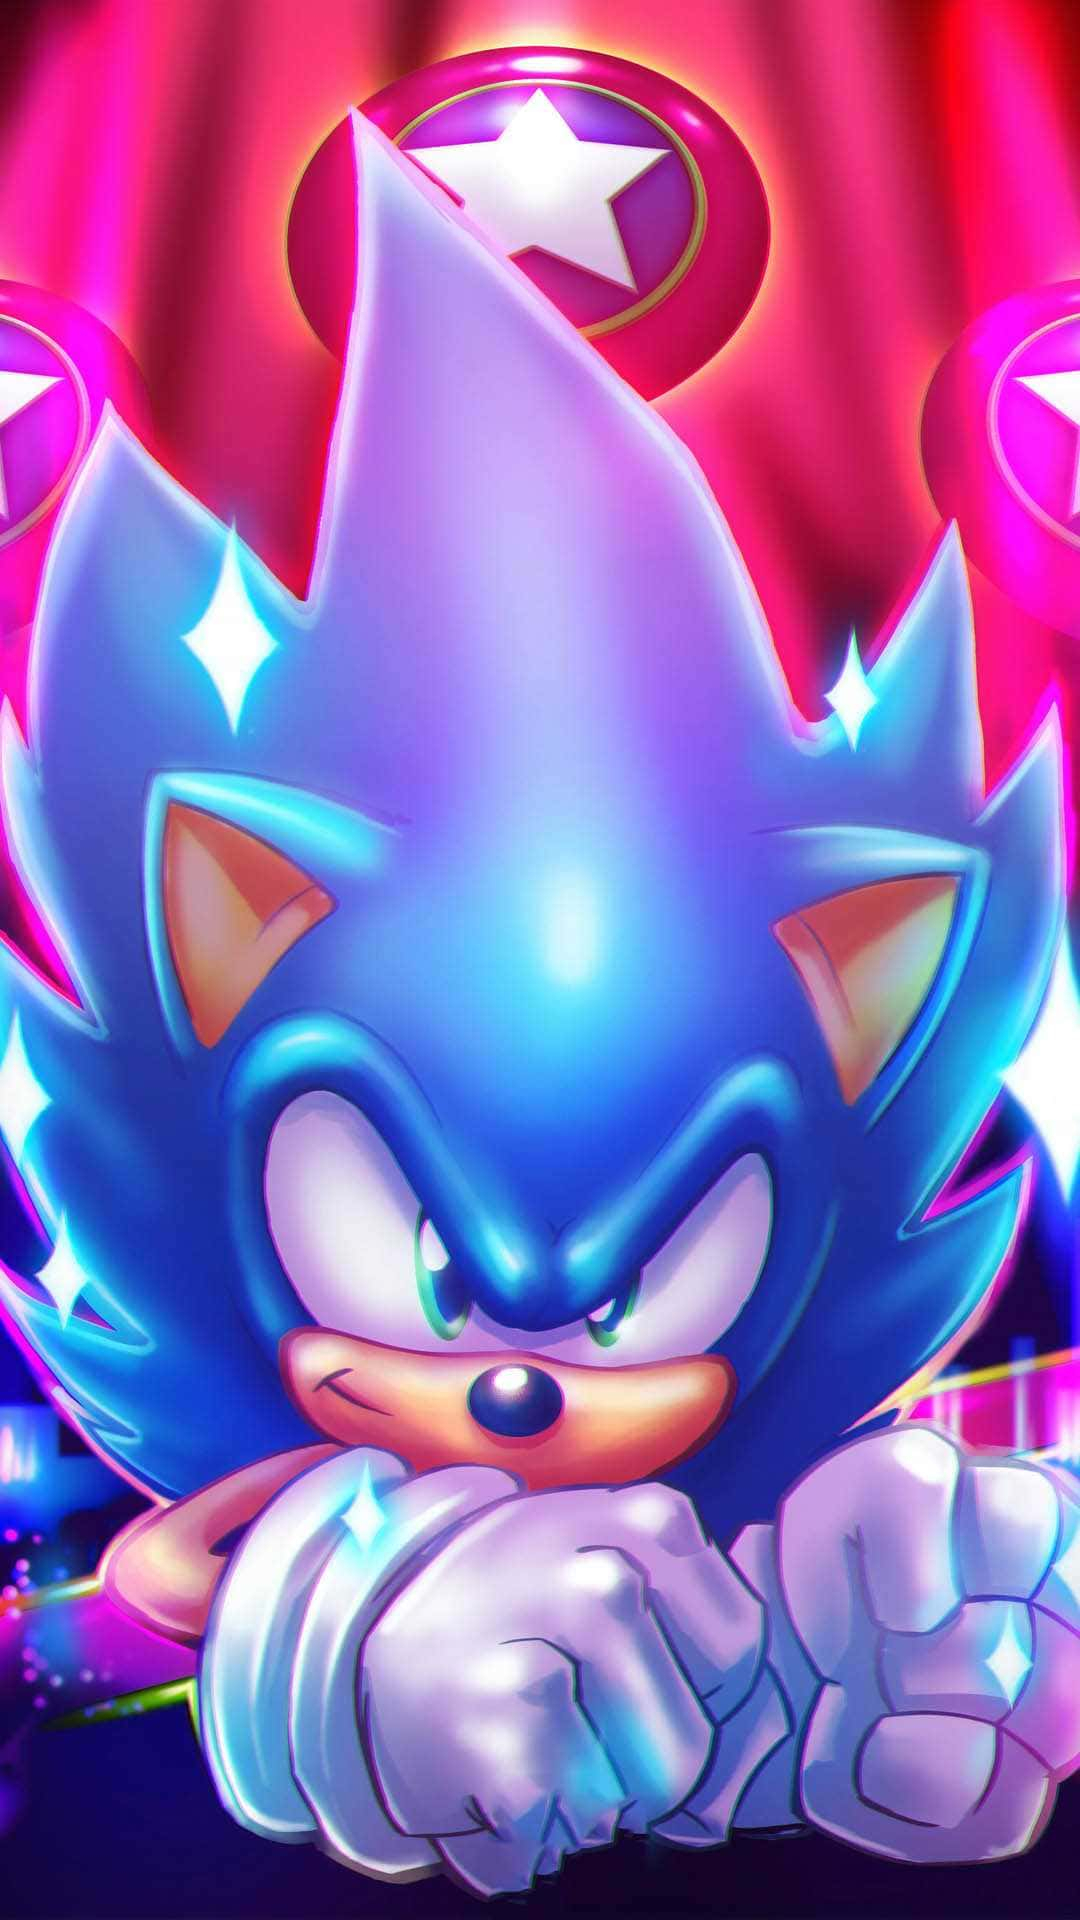 1080x1920 Sonic The Hedgehog Phone Wallpapers | WONDER DAY &acirc;&#128;&#148; Coloring pages for children and adults